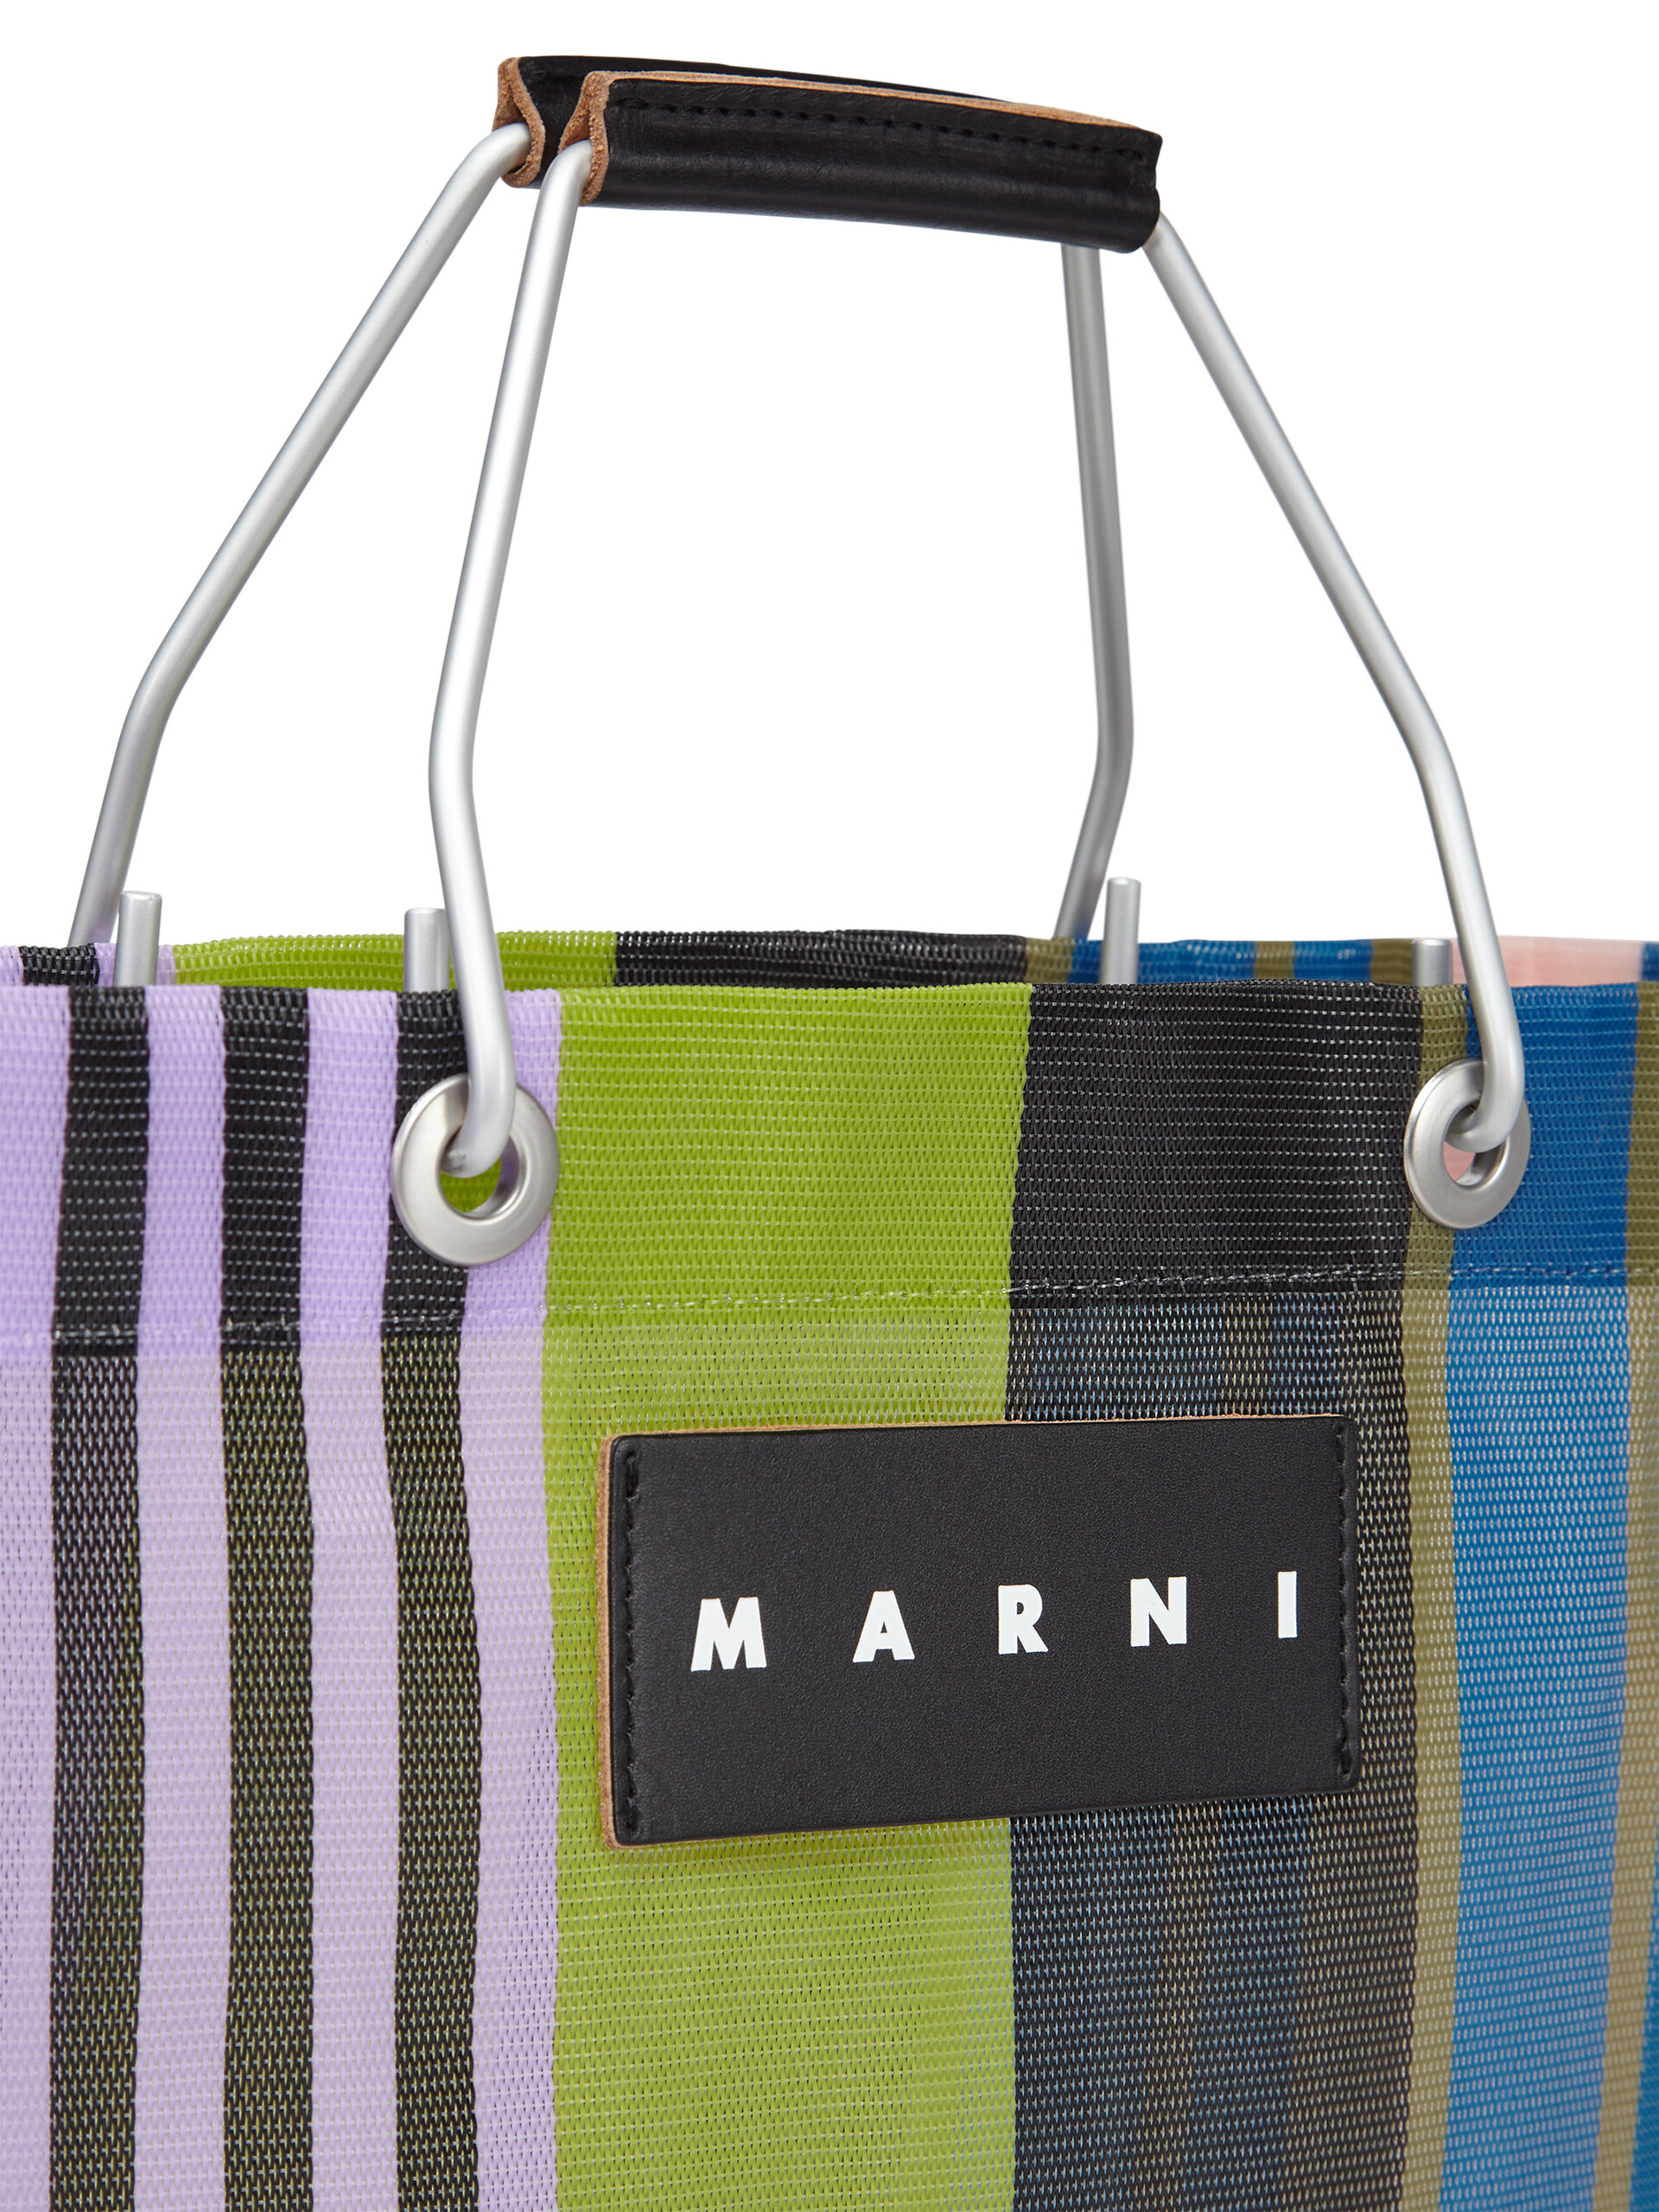 MARNI MARKET shopping bag in striped lilac, green, black, beige and blue polyamide - Bags - Image 4